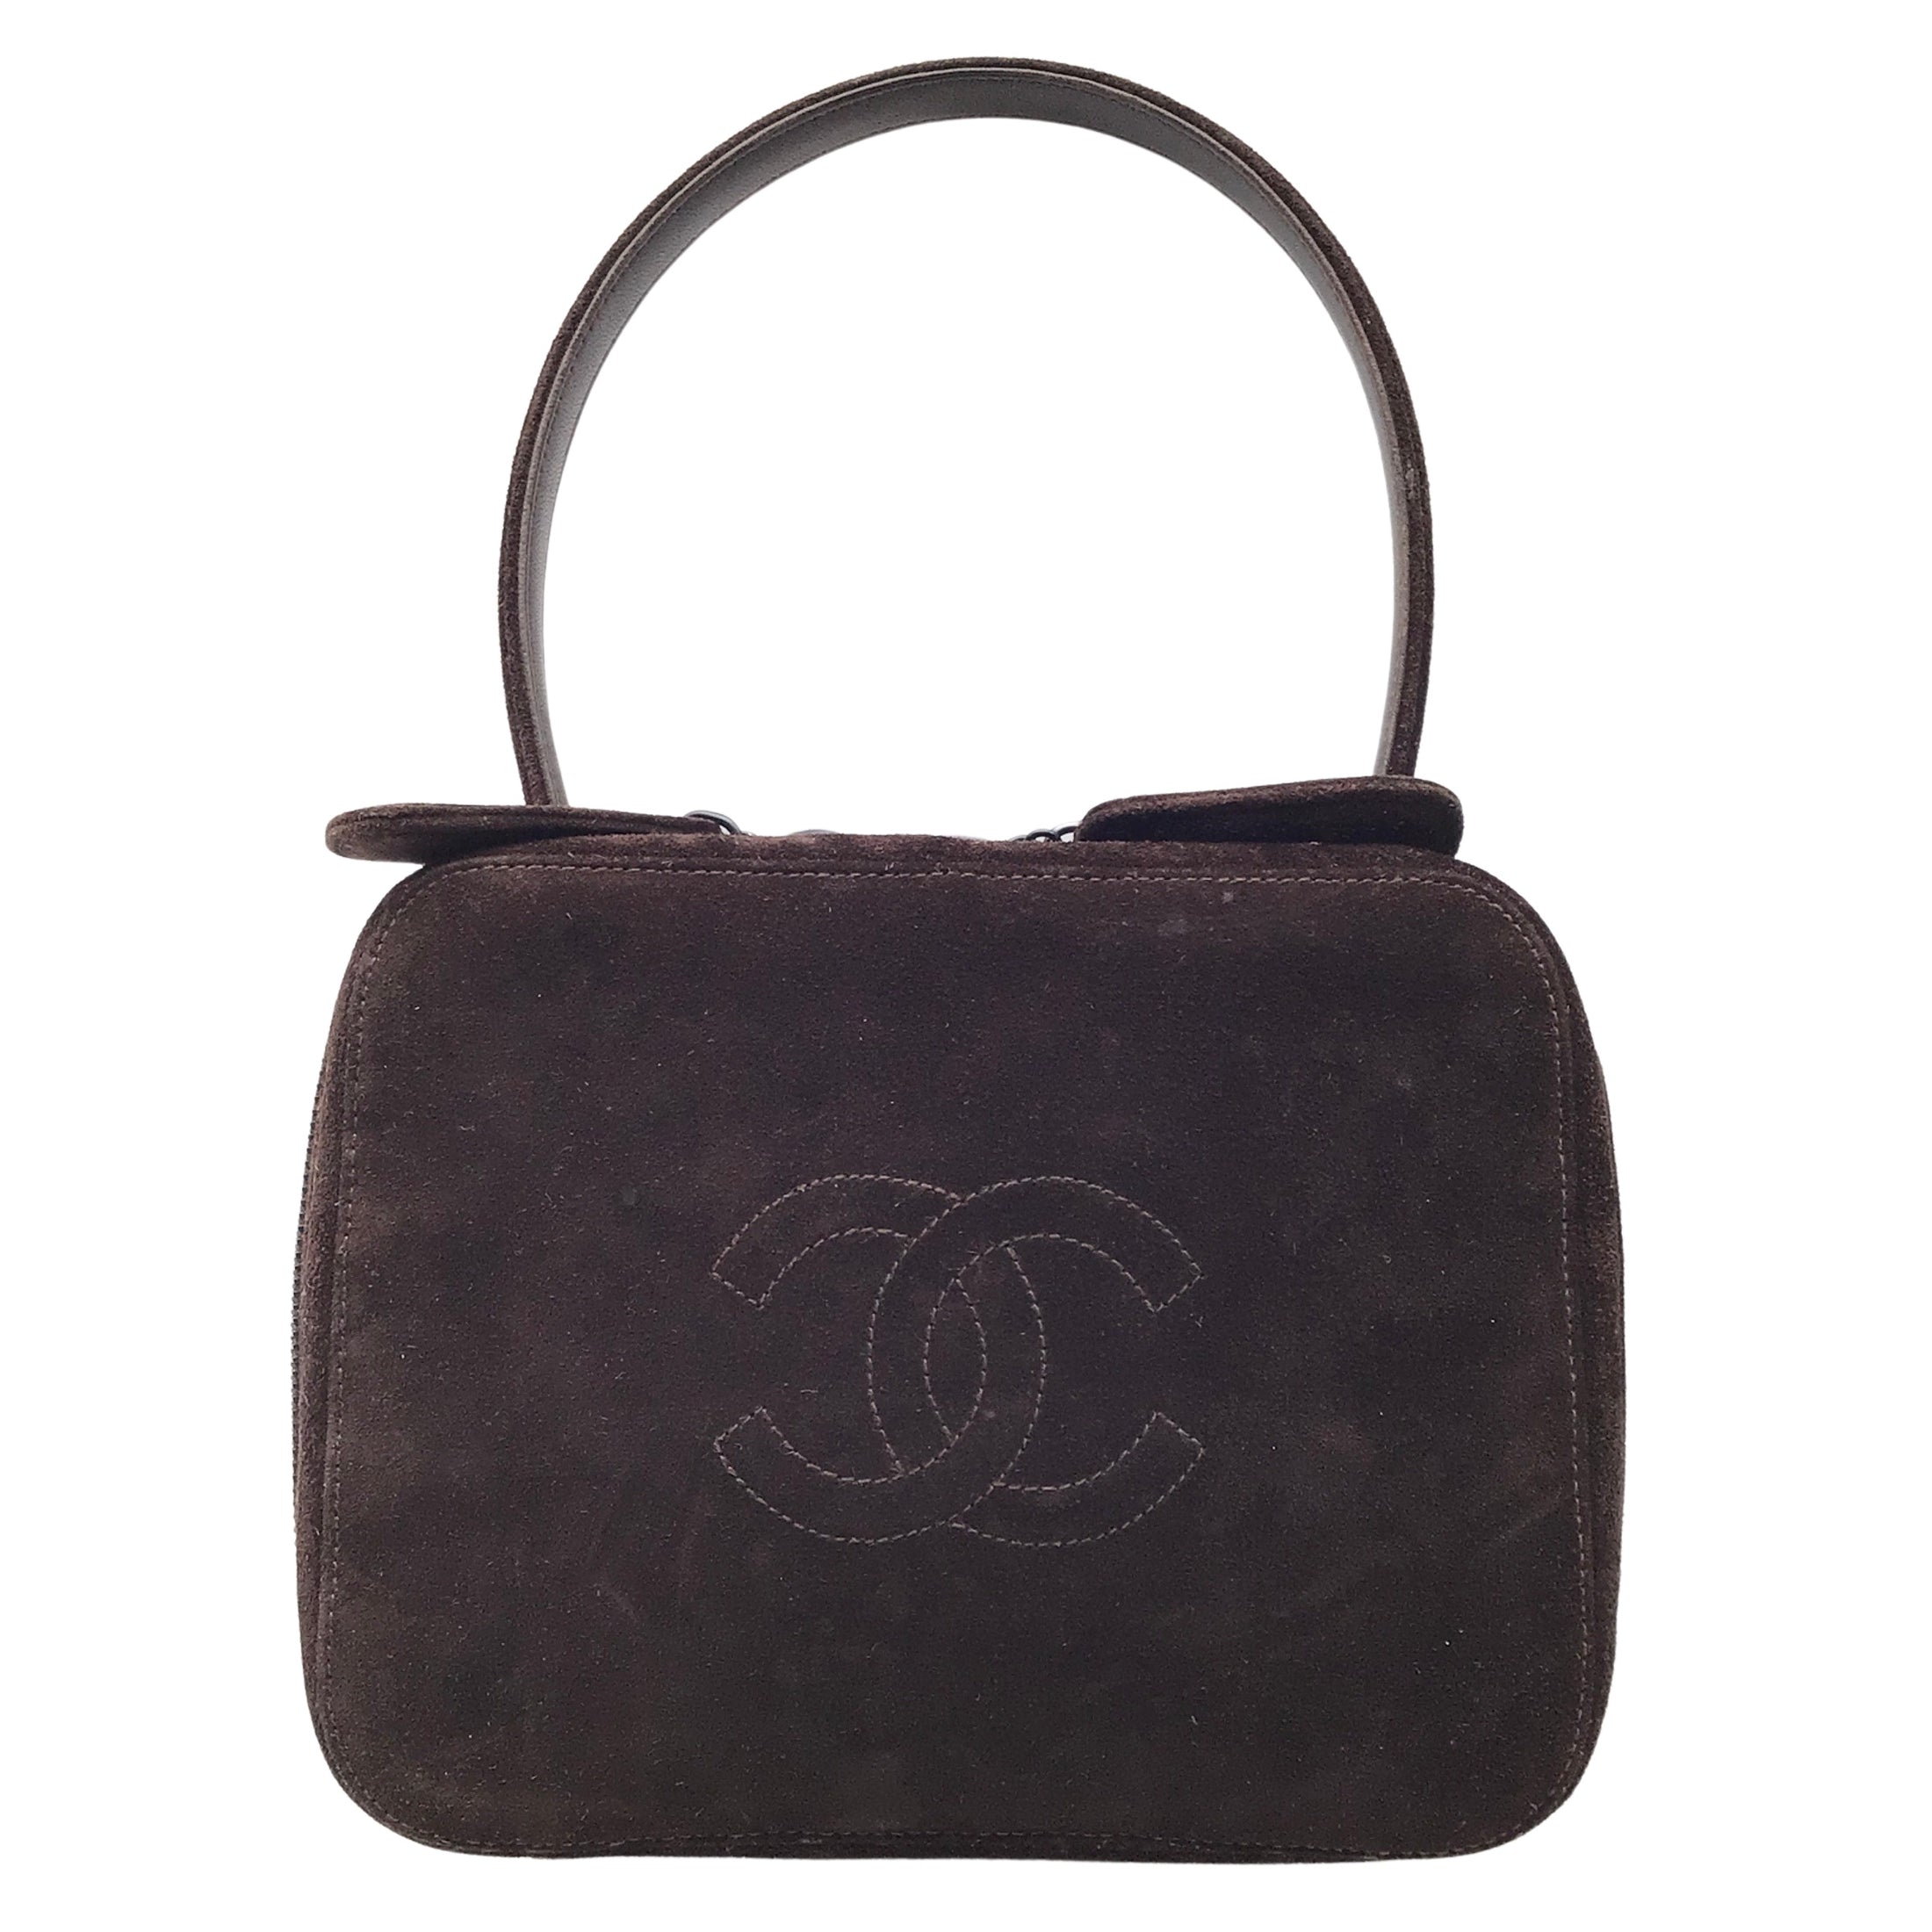 Chanel Vintage 90s Cc Logo Brown Suede Leather Tote